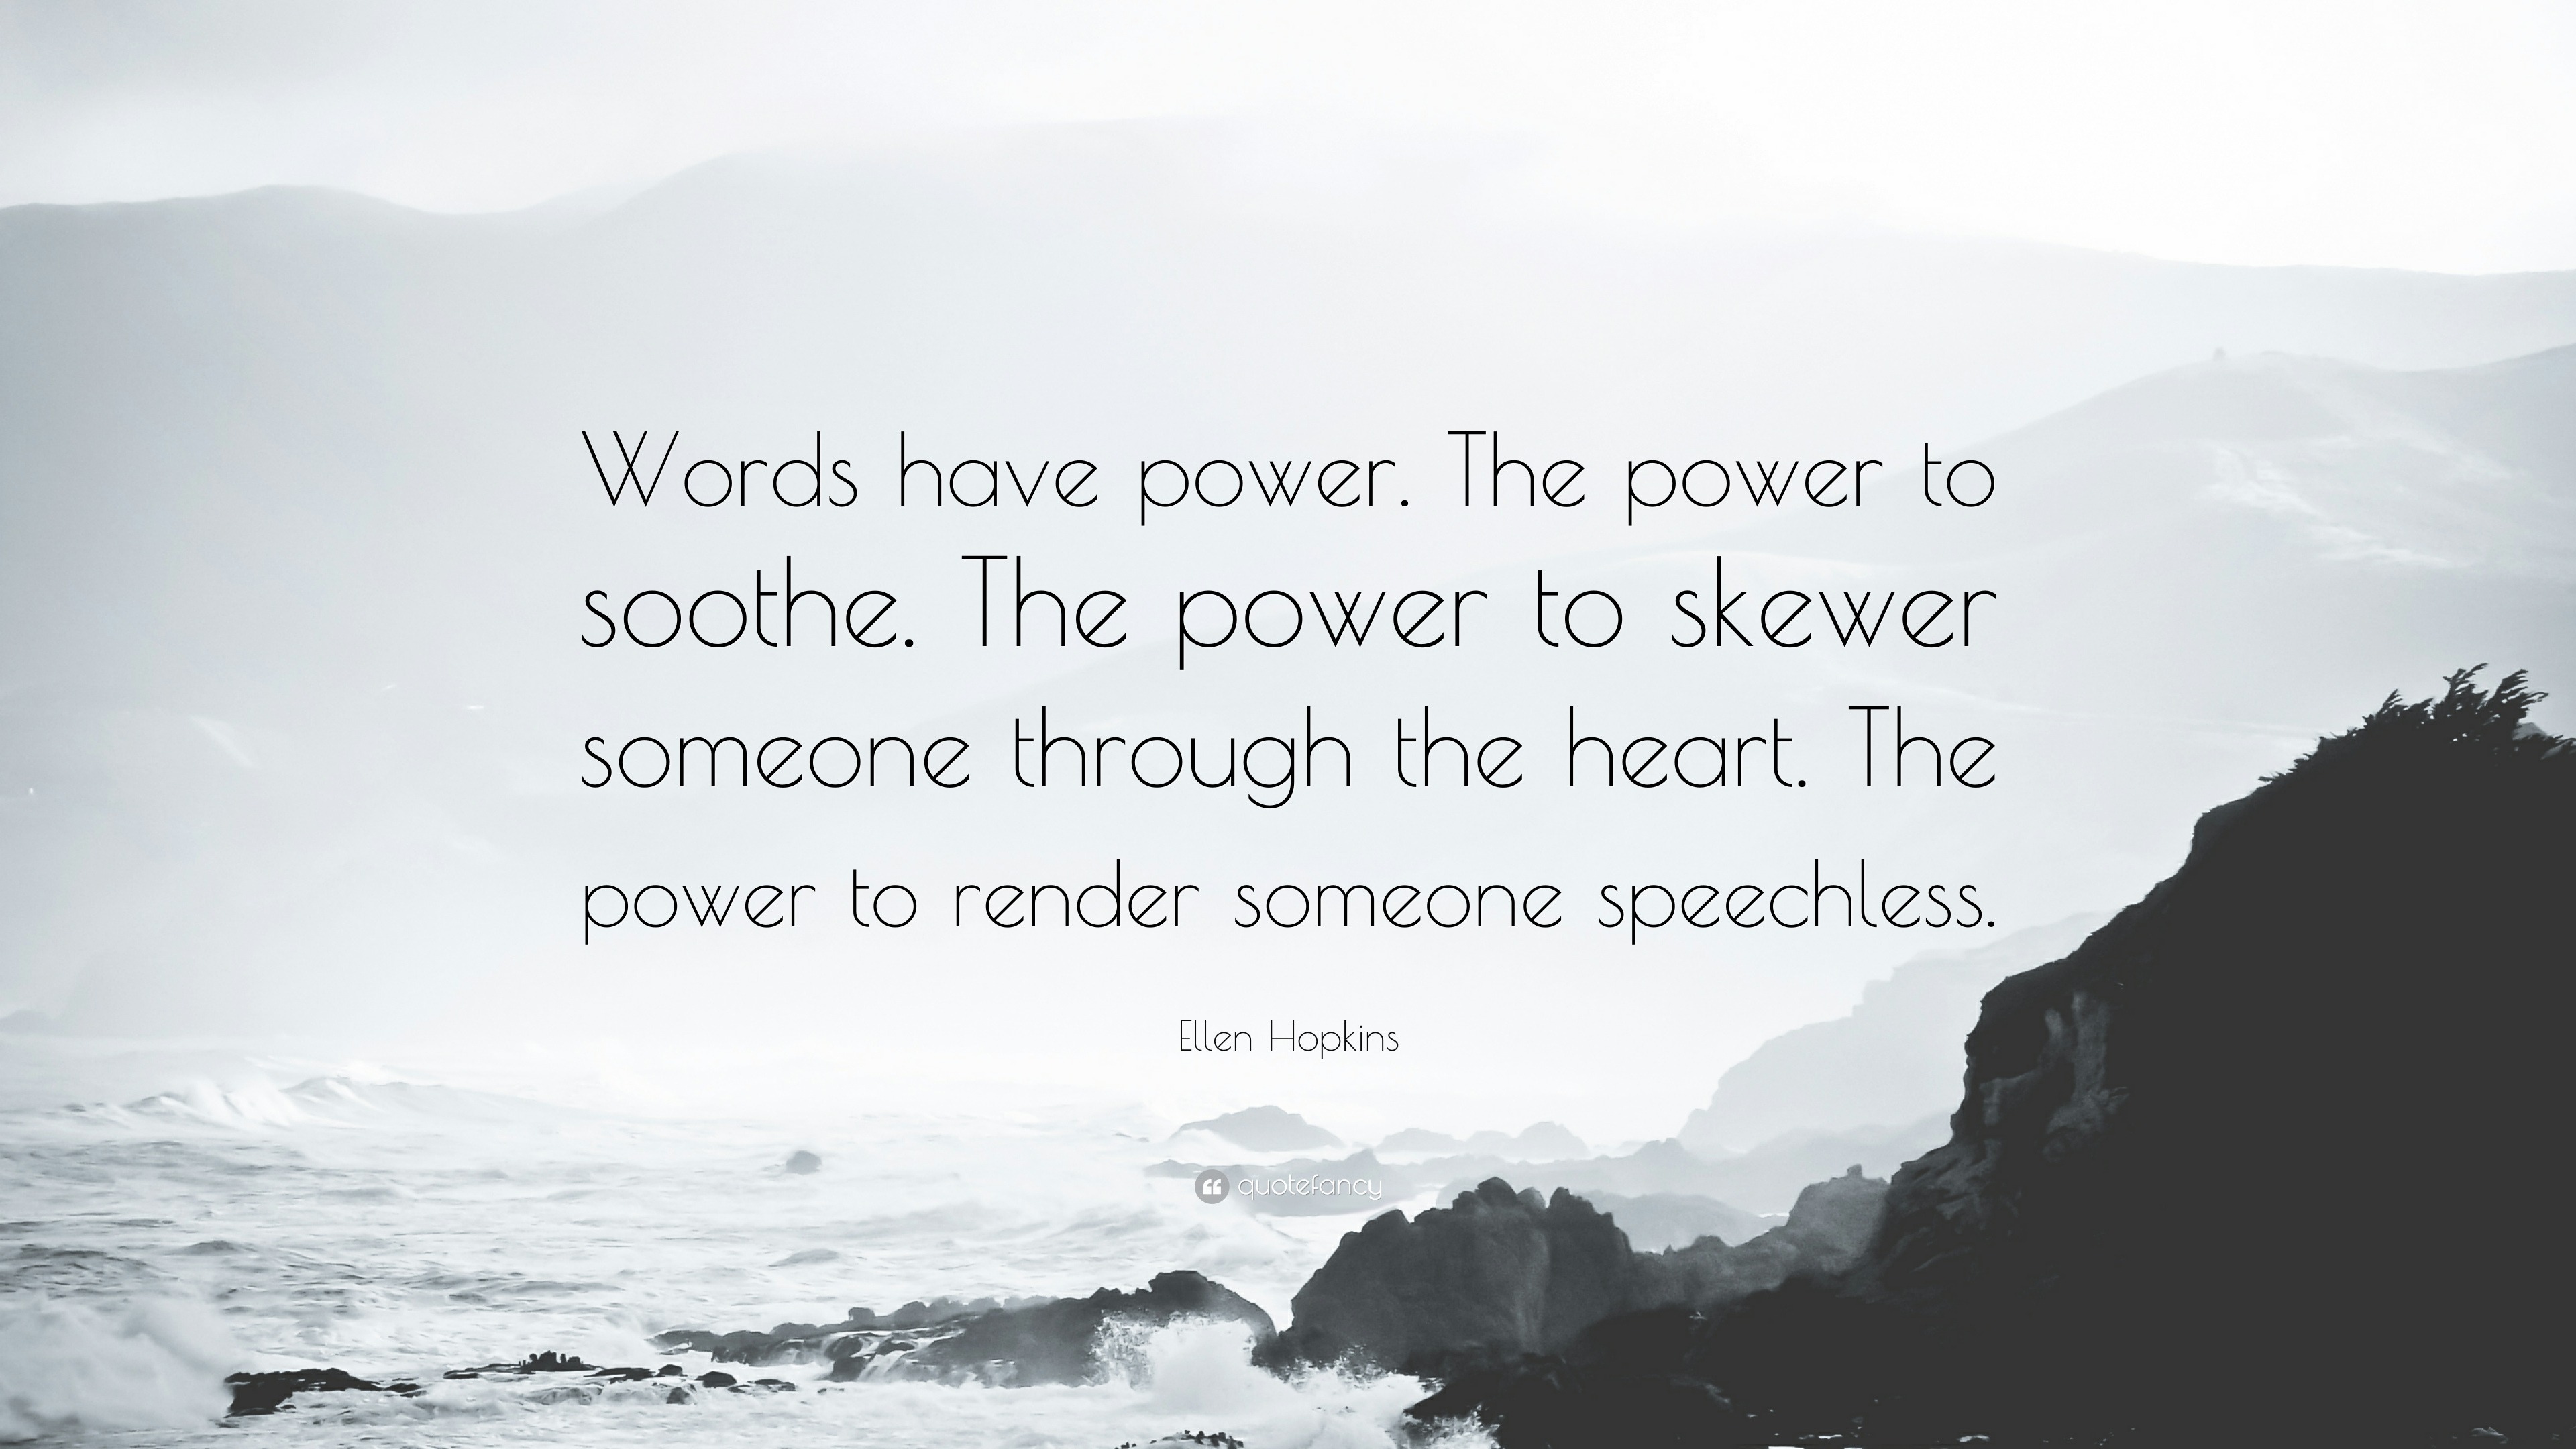 speech on words have power